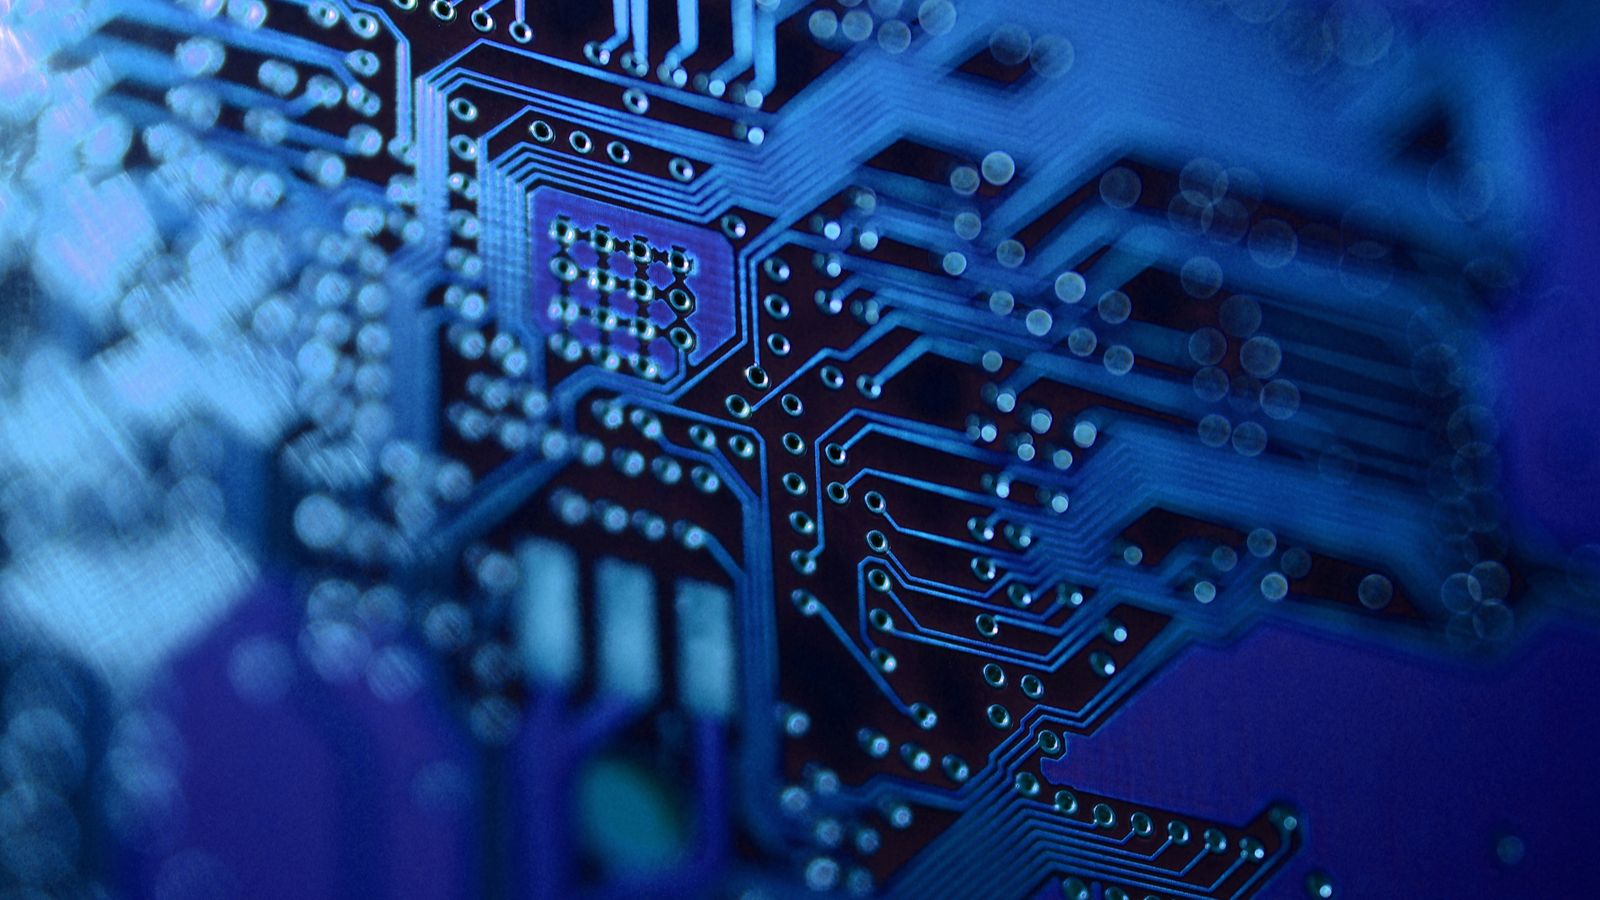 2 Semiconductor ETFs to Buy to Play the Chip Sector | InvestorPlace